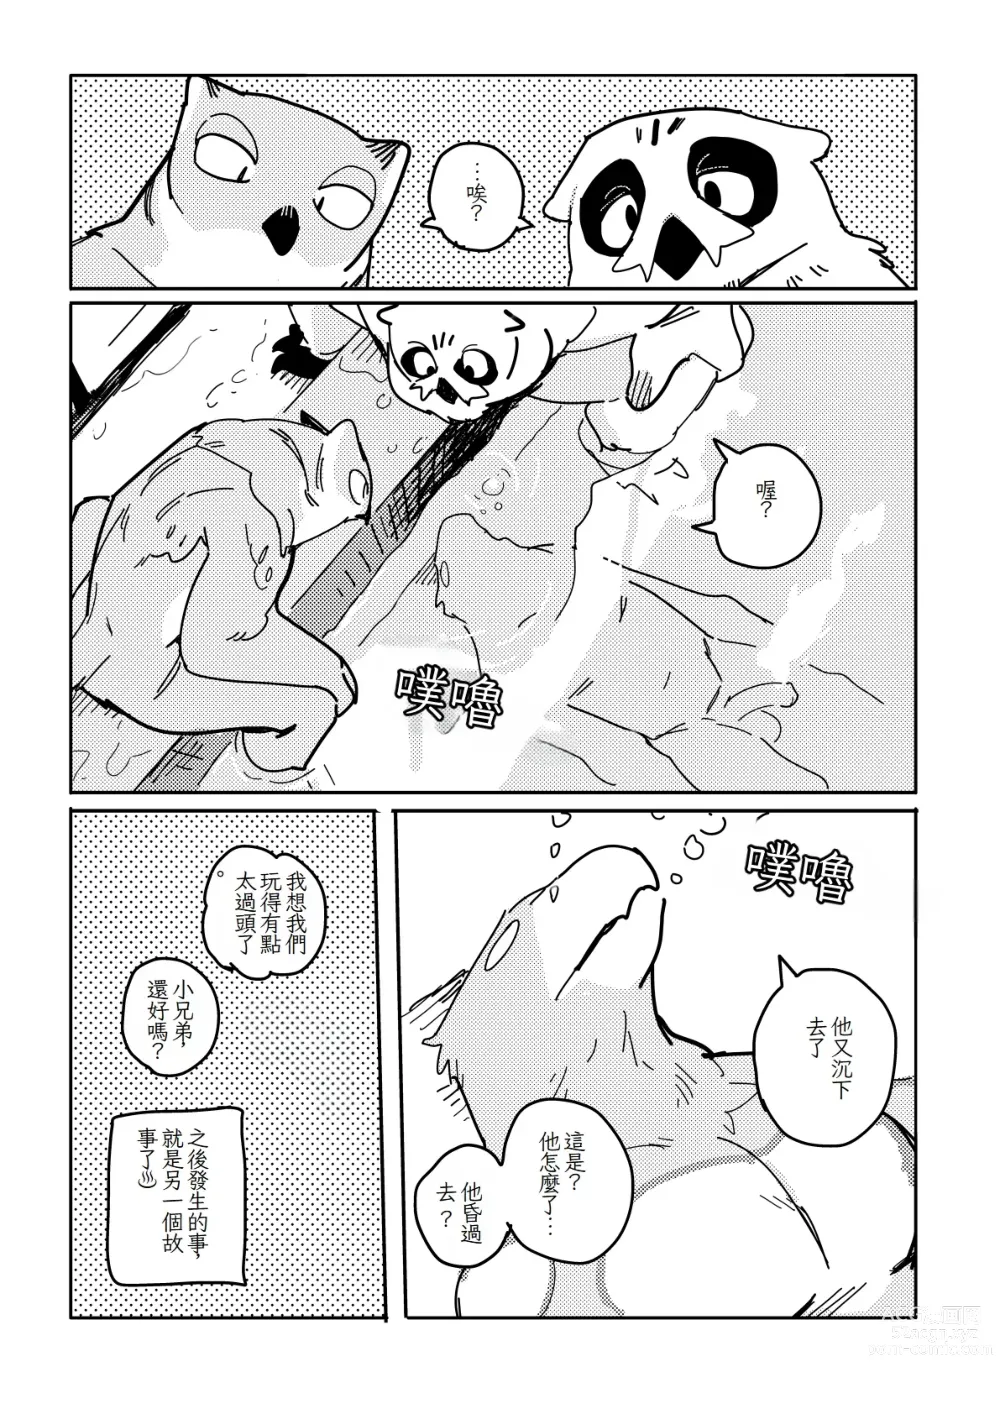 Page 14 of doujinshi White-Tailed Eagle and Owls 白尾鷹與鴞